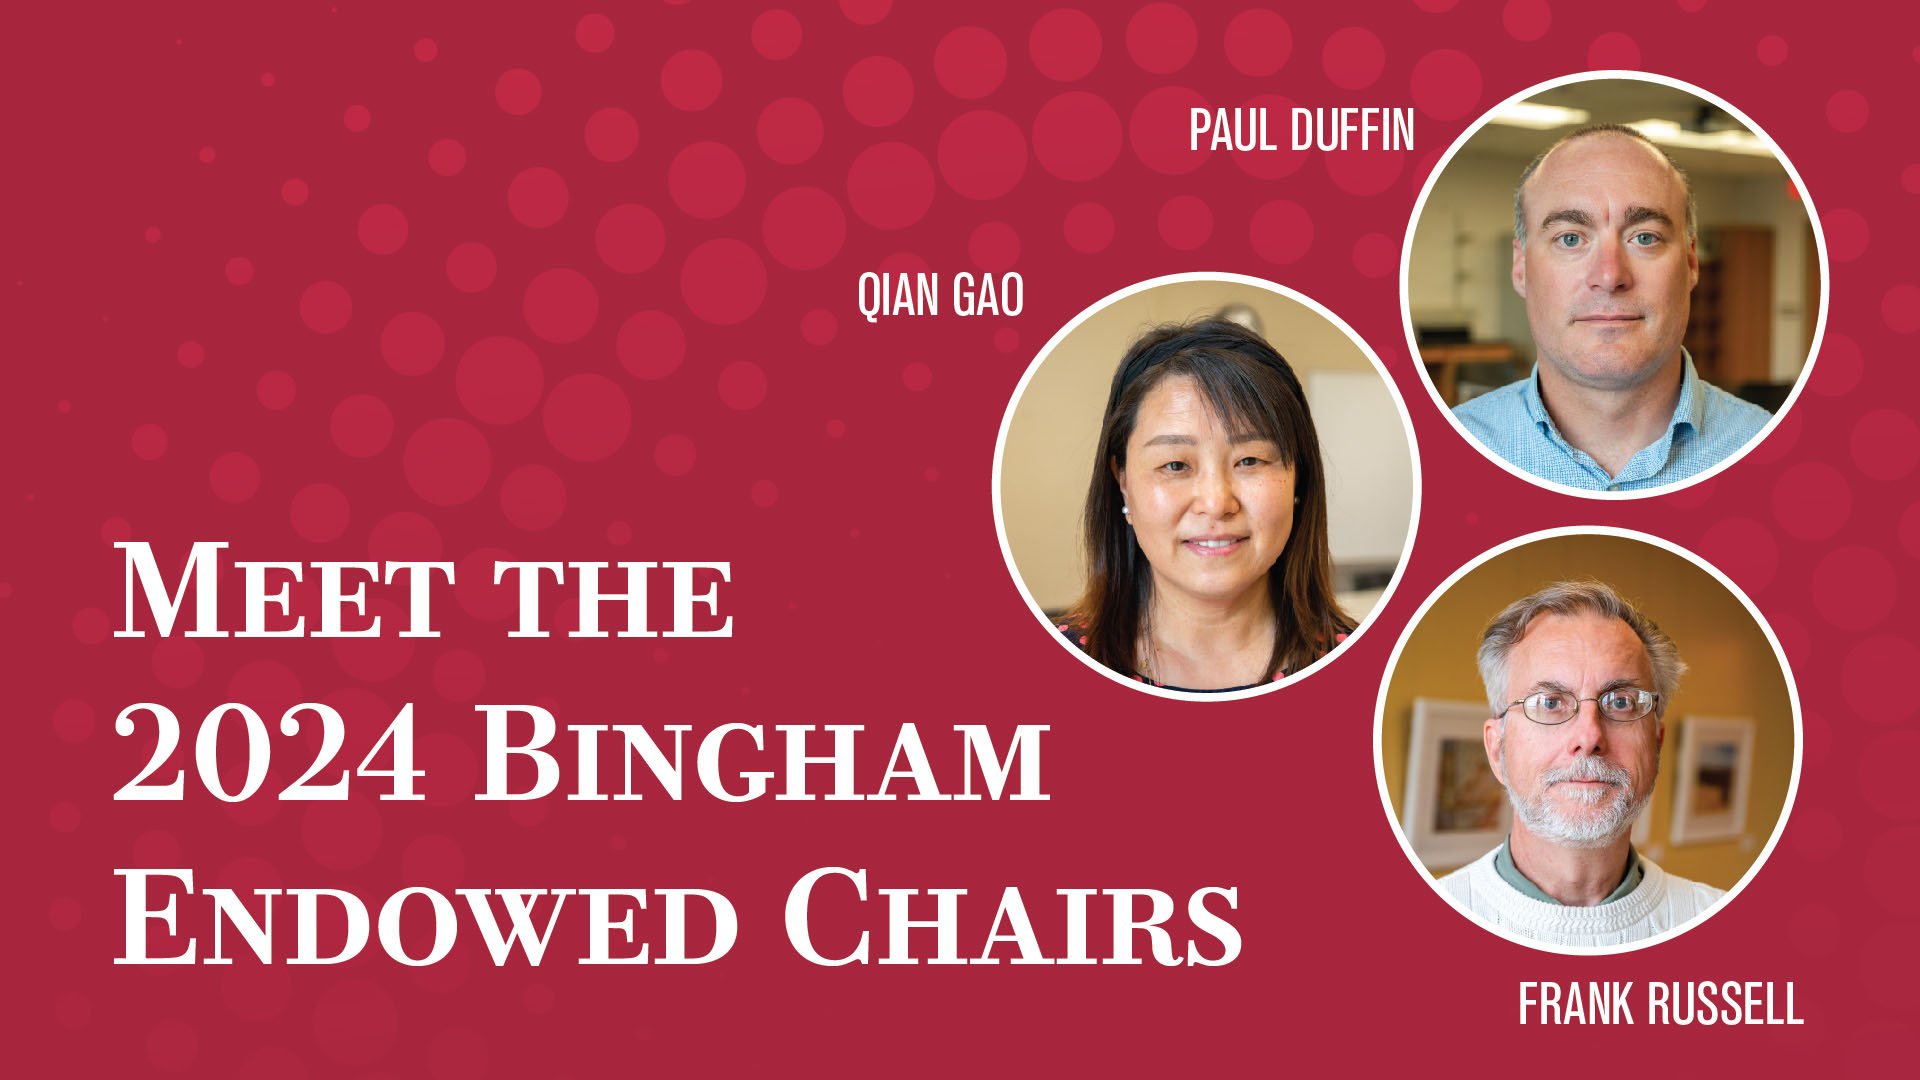 Professors Paul Duffin, Qian Gao and Frank Russell are the 2024 Bingham Endowed Chairs.